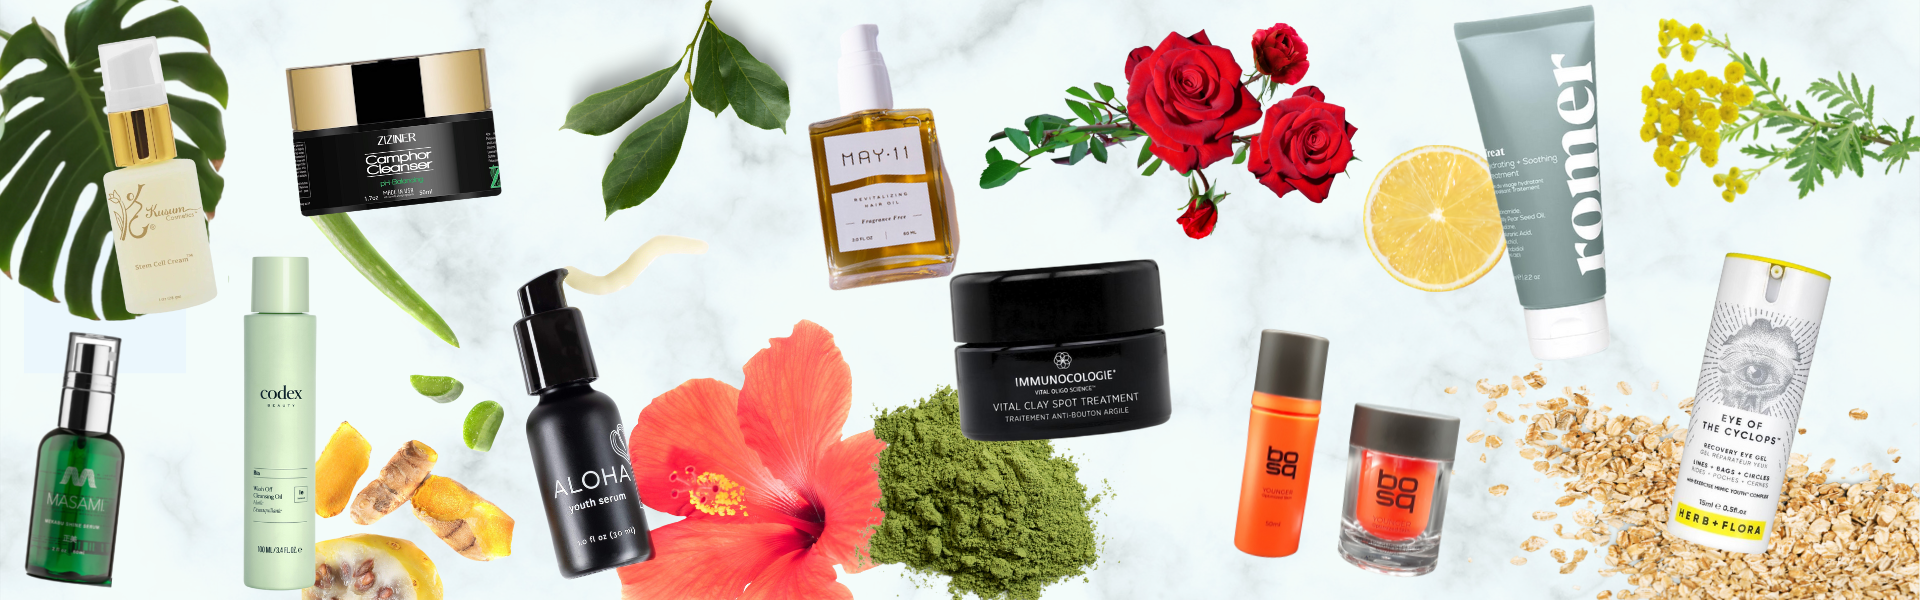 Skincare & Haircare Best Sellers